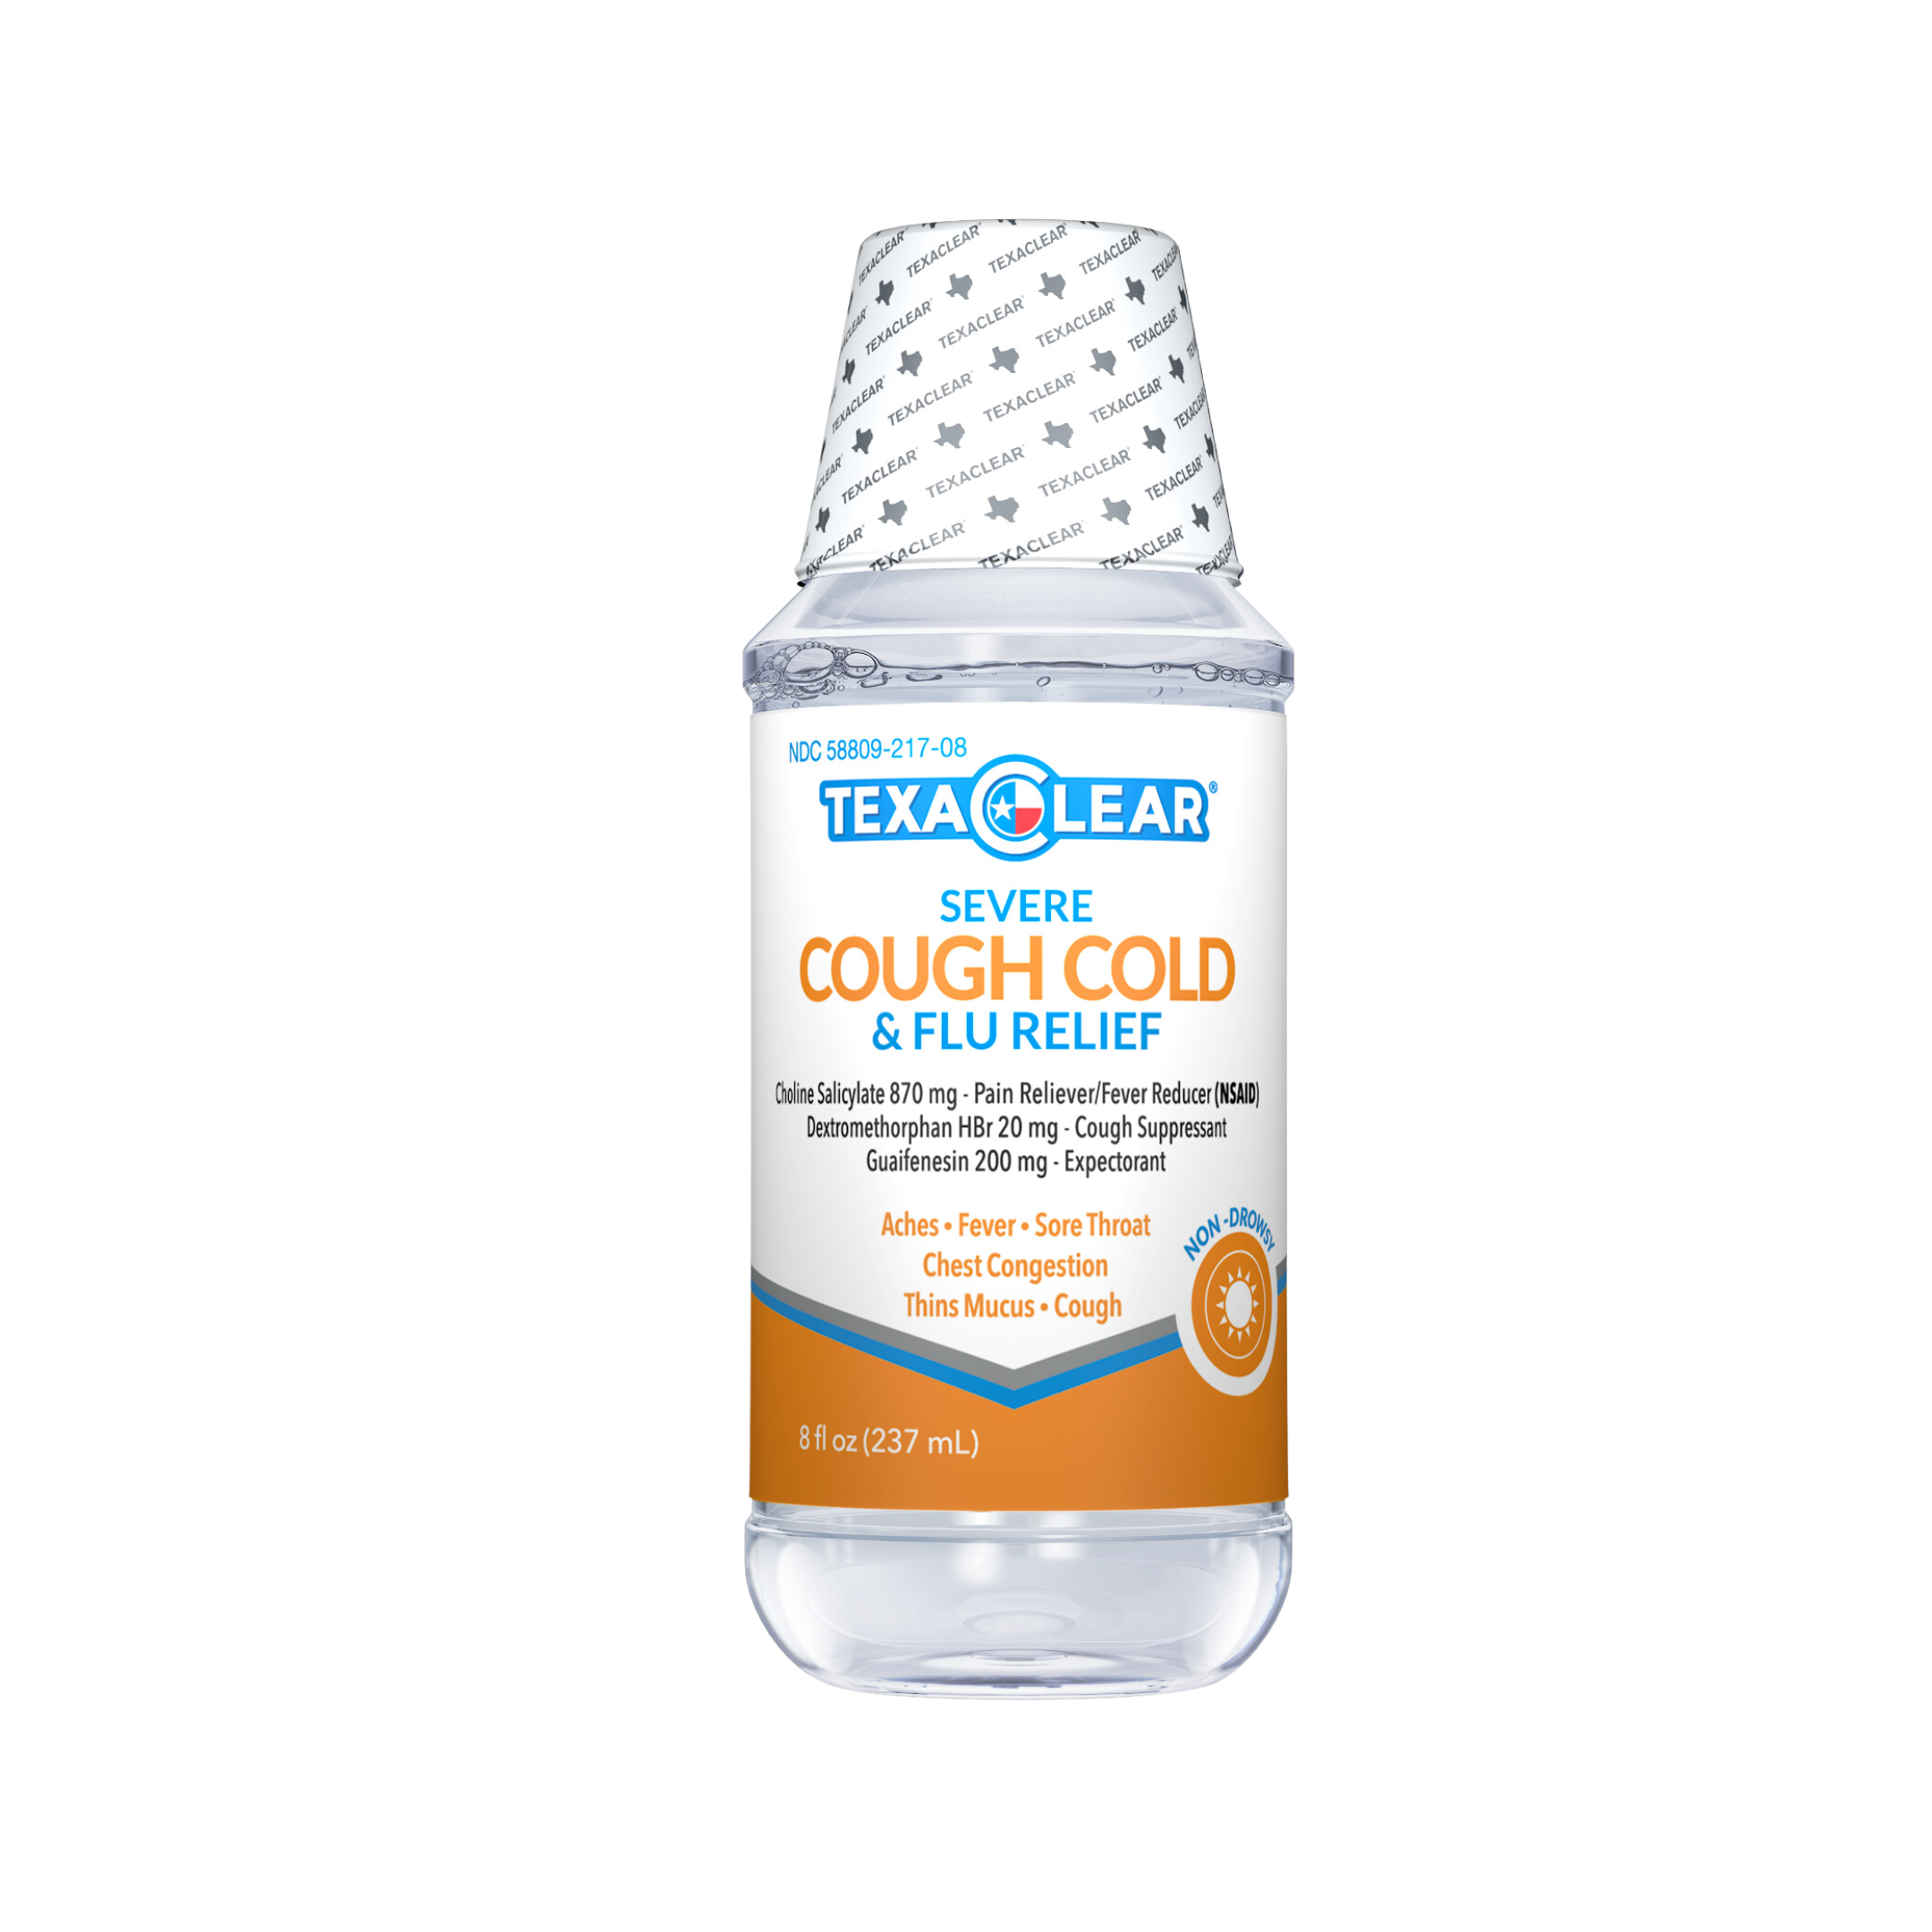 TexaClear Severe Cough Cold and Flu Relief